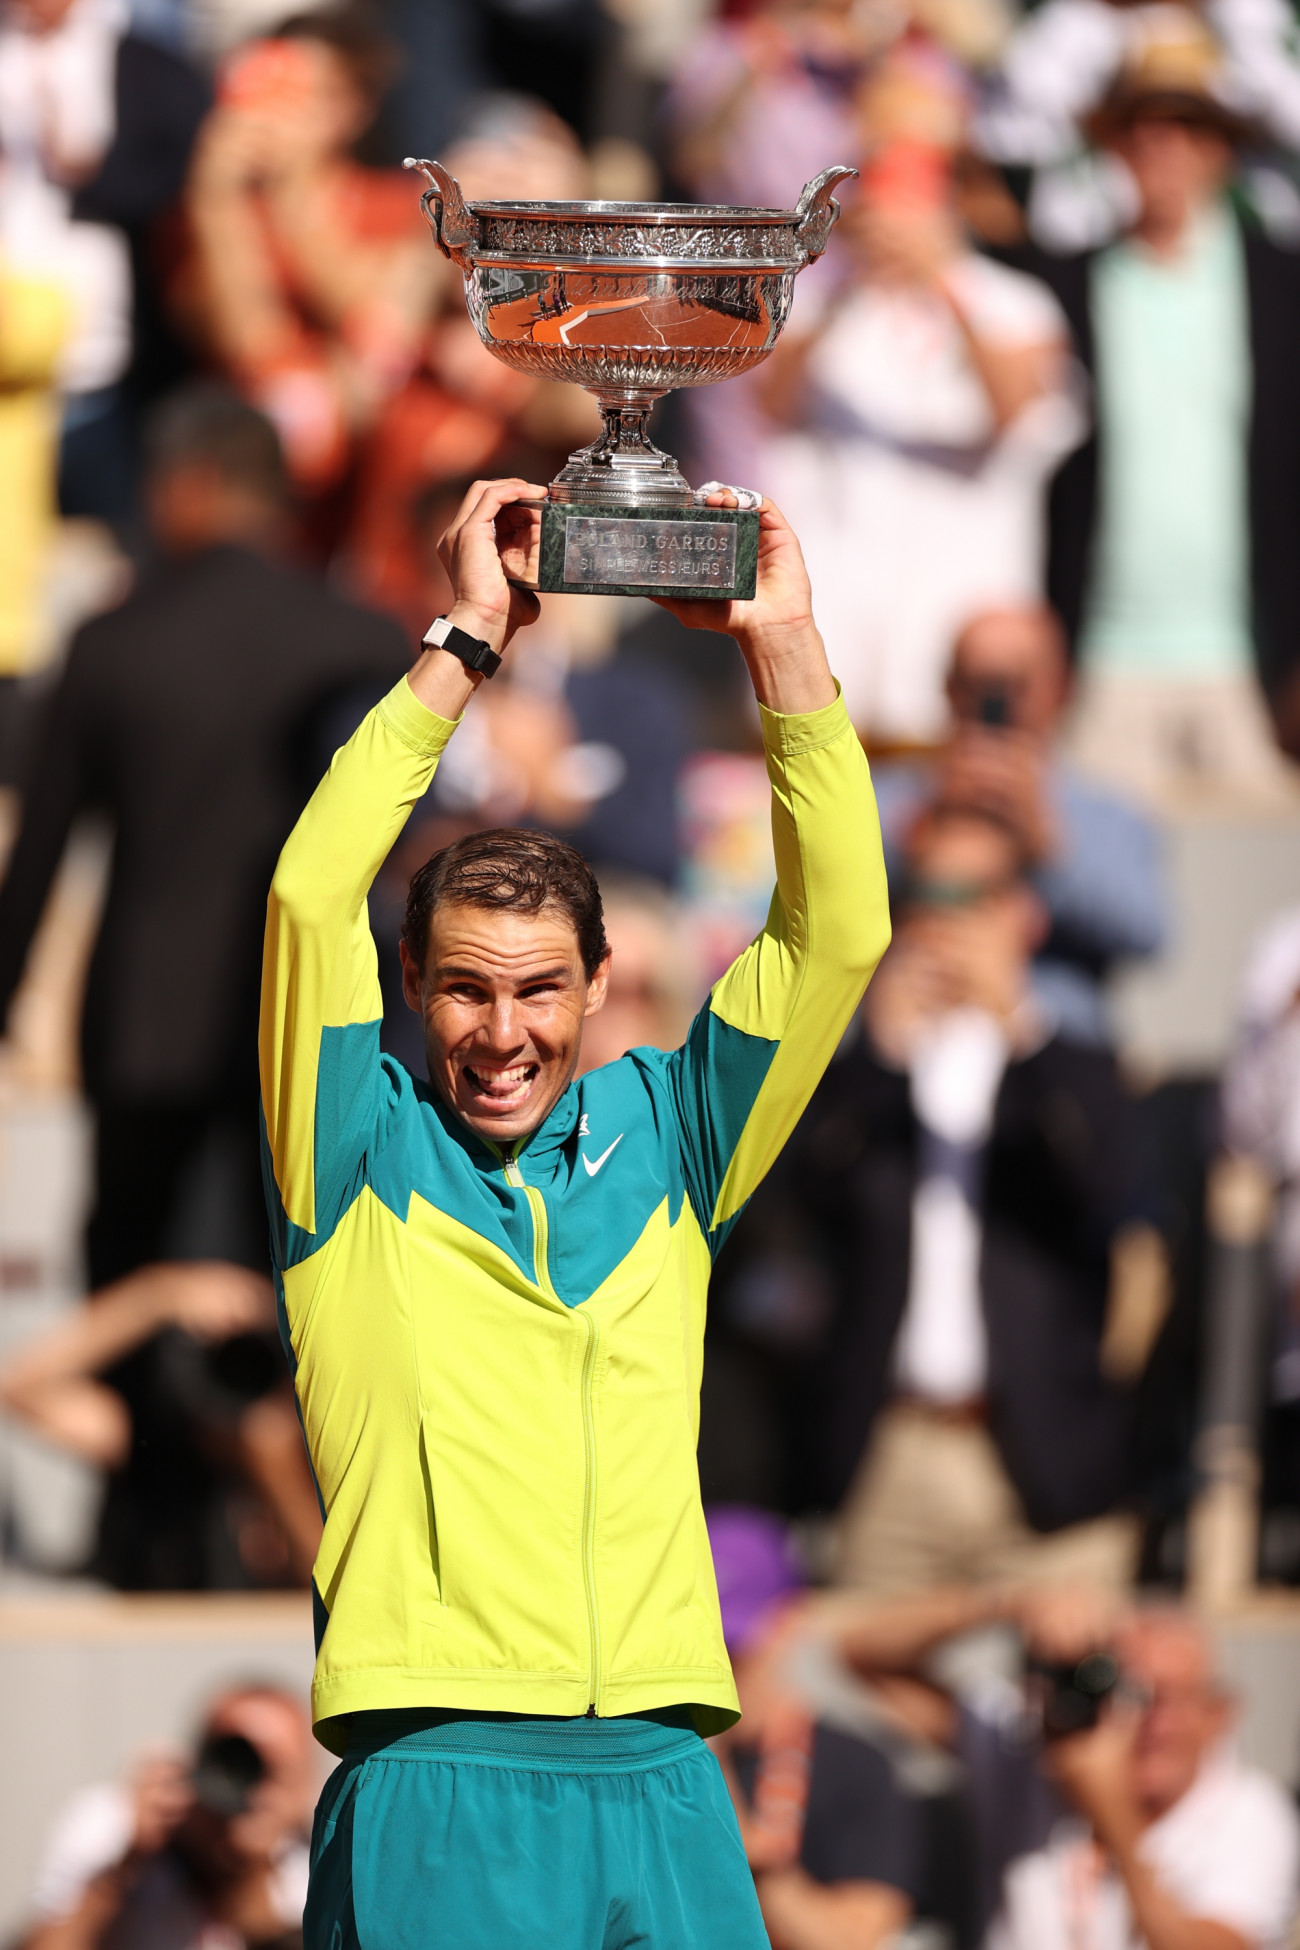 PARIS, FRANCE - JUNE 05: Rafael Nadal of Spain celebrates with the trophy after winning against Casper Ruud of Norway during the Men's Singles Final match on Day 15 of The 2022 French Open at Roland Garros on June 05, 2022 in Paris, France. (Photo by Ryan Pierse/Getty Images)